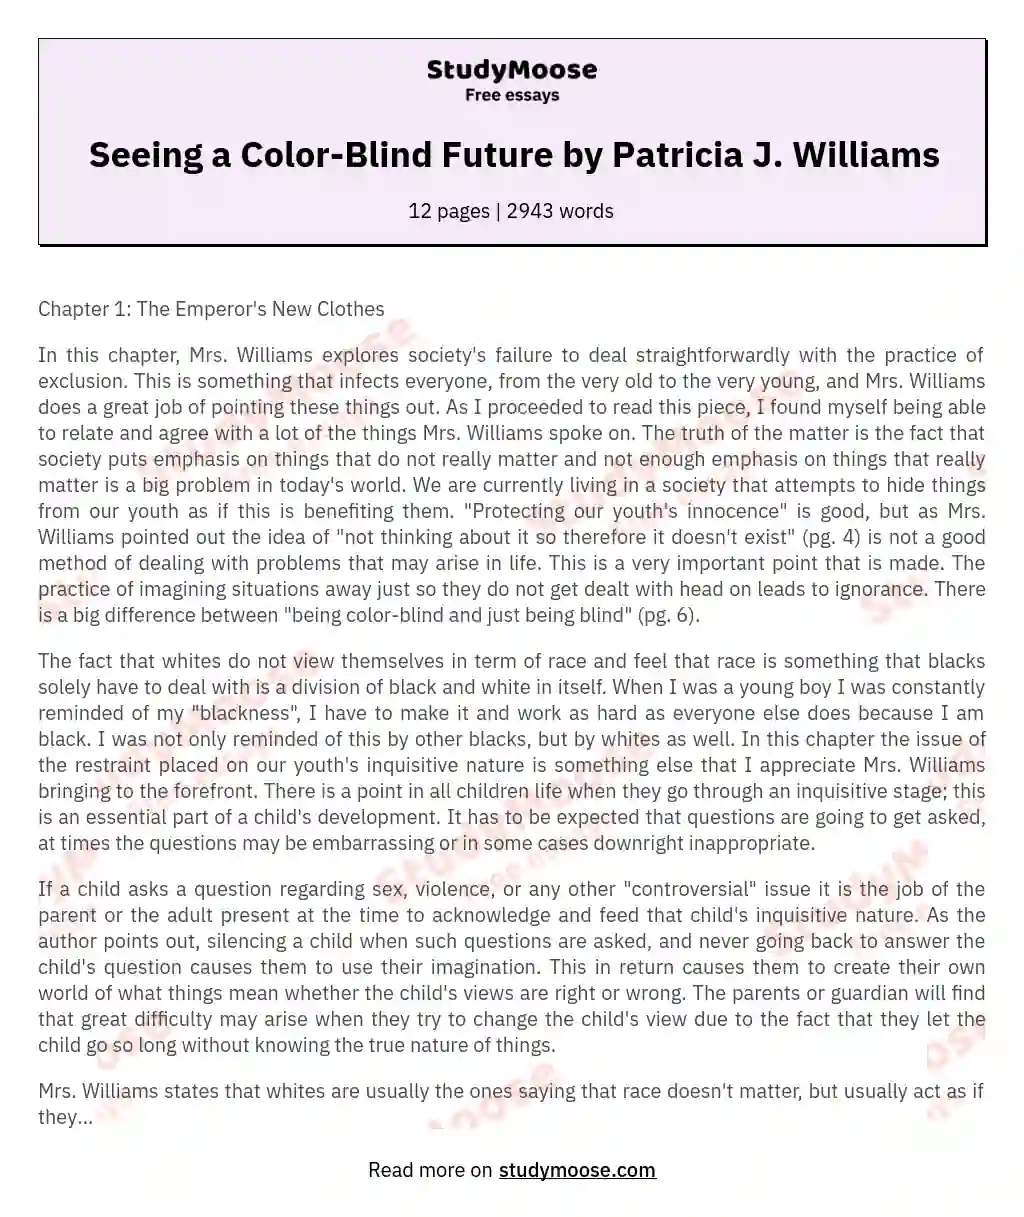 Seeing a Color-Blind Future by Patricia J. Williams essay